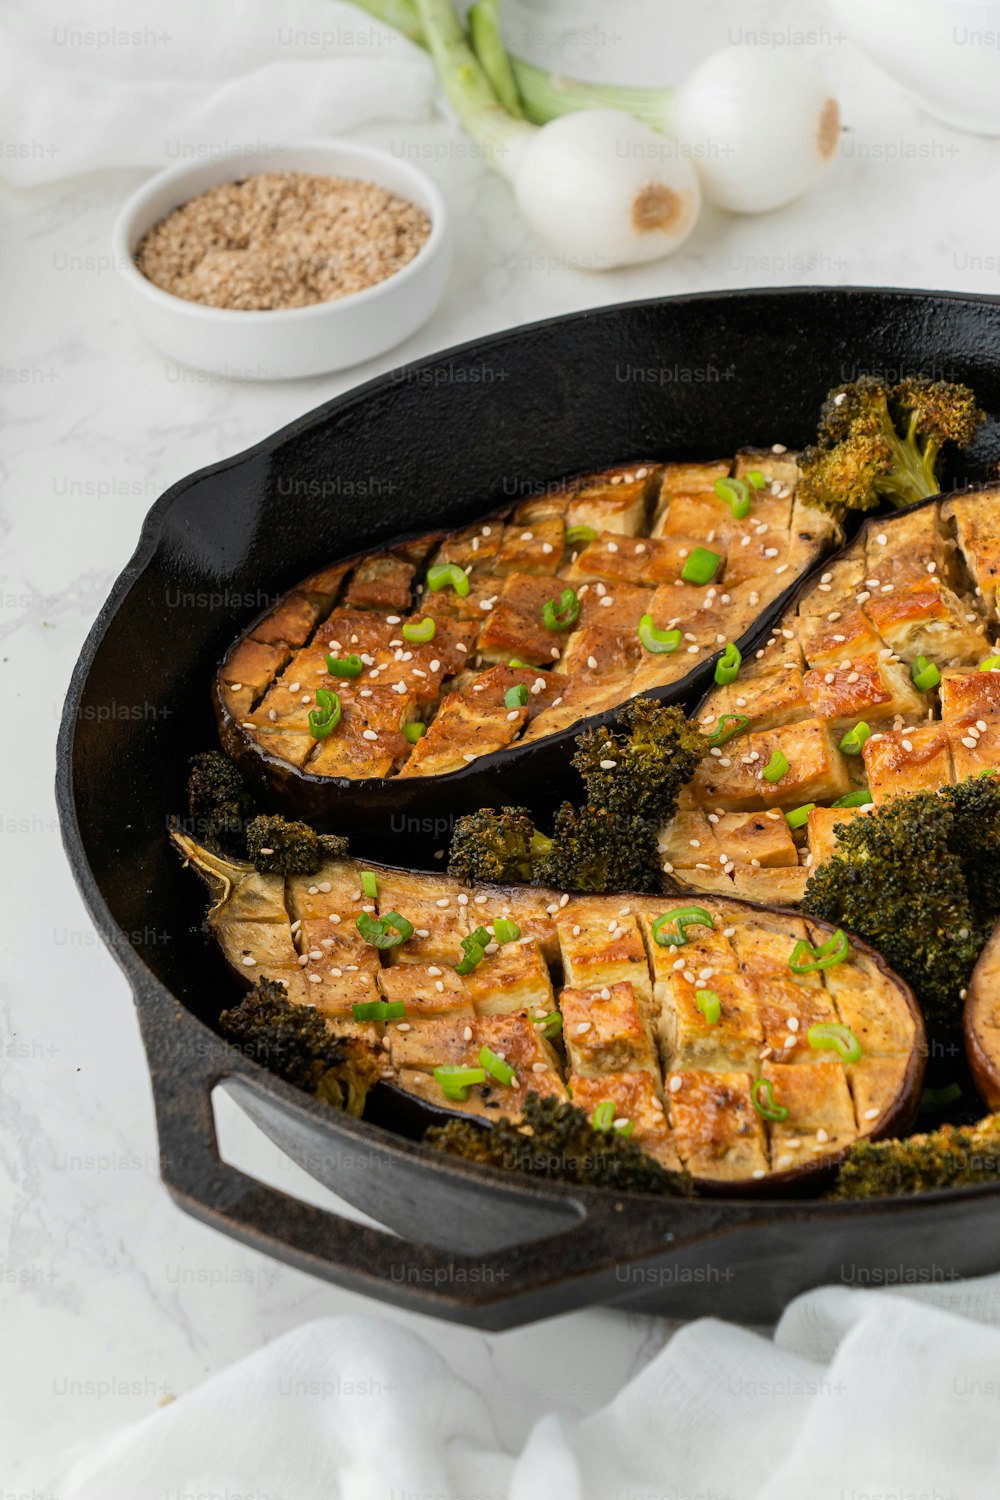 a pan filled with chicken and broccoli covered in sesame seeds